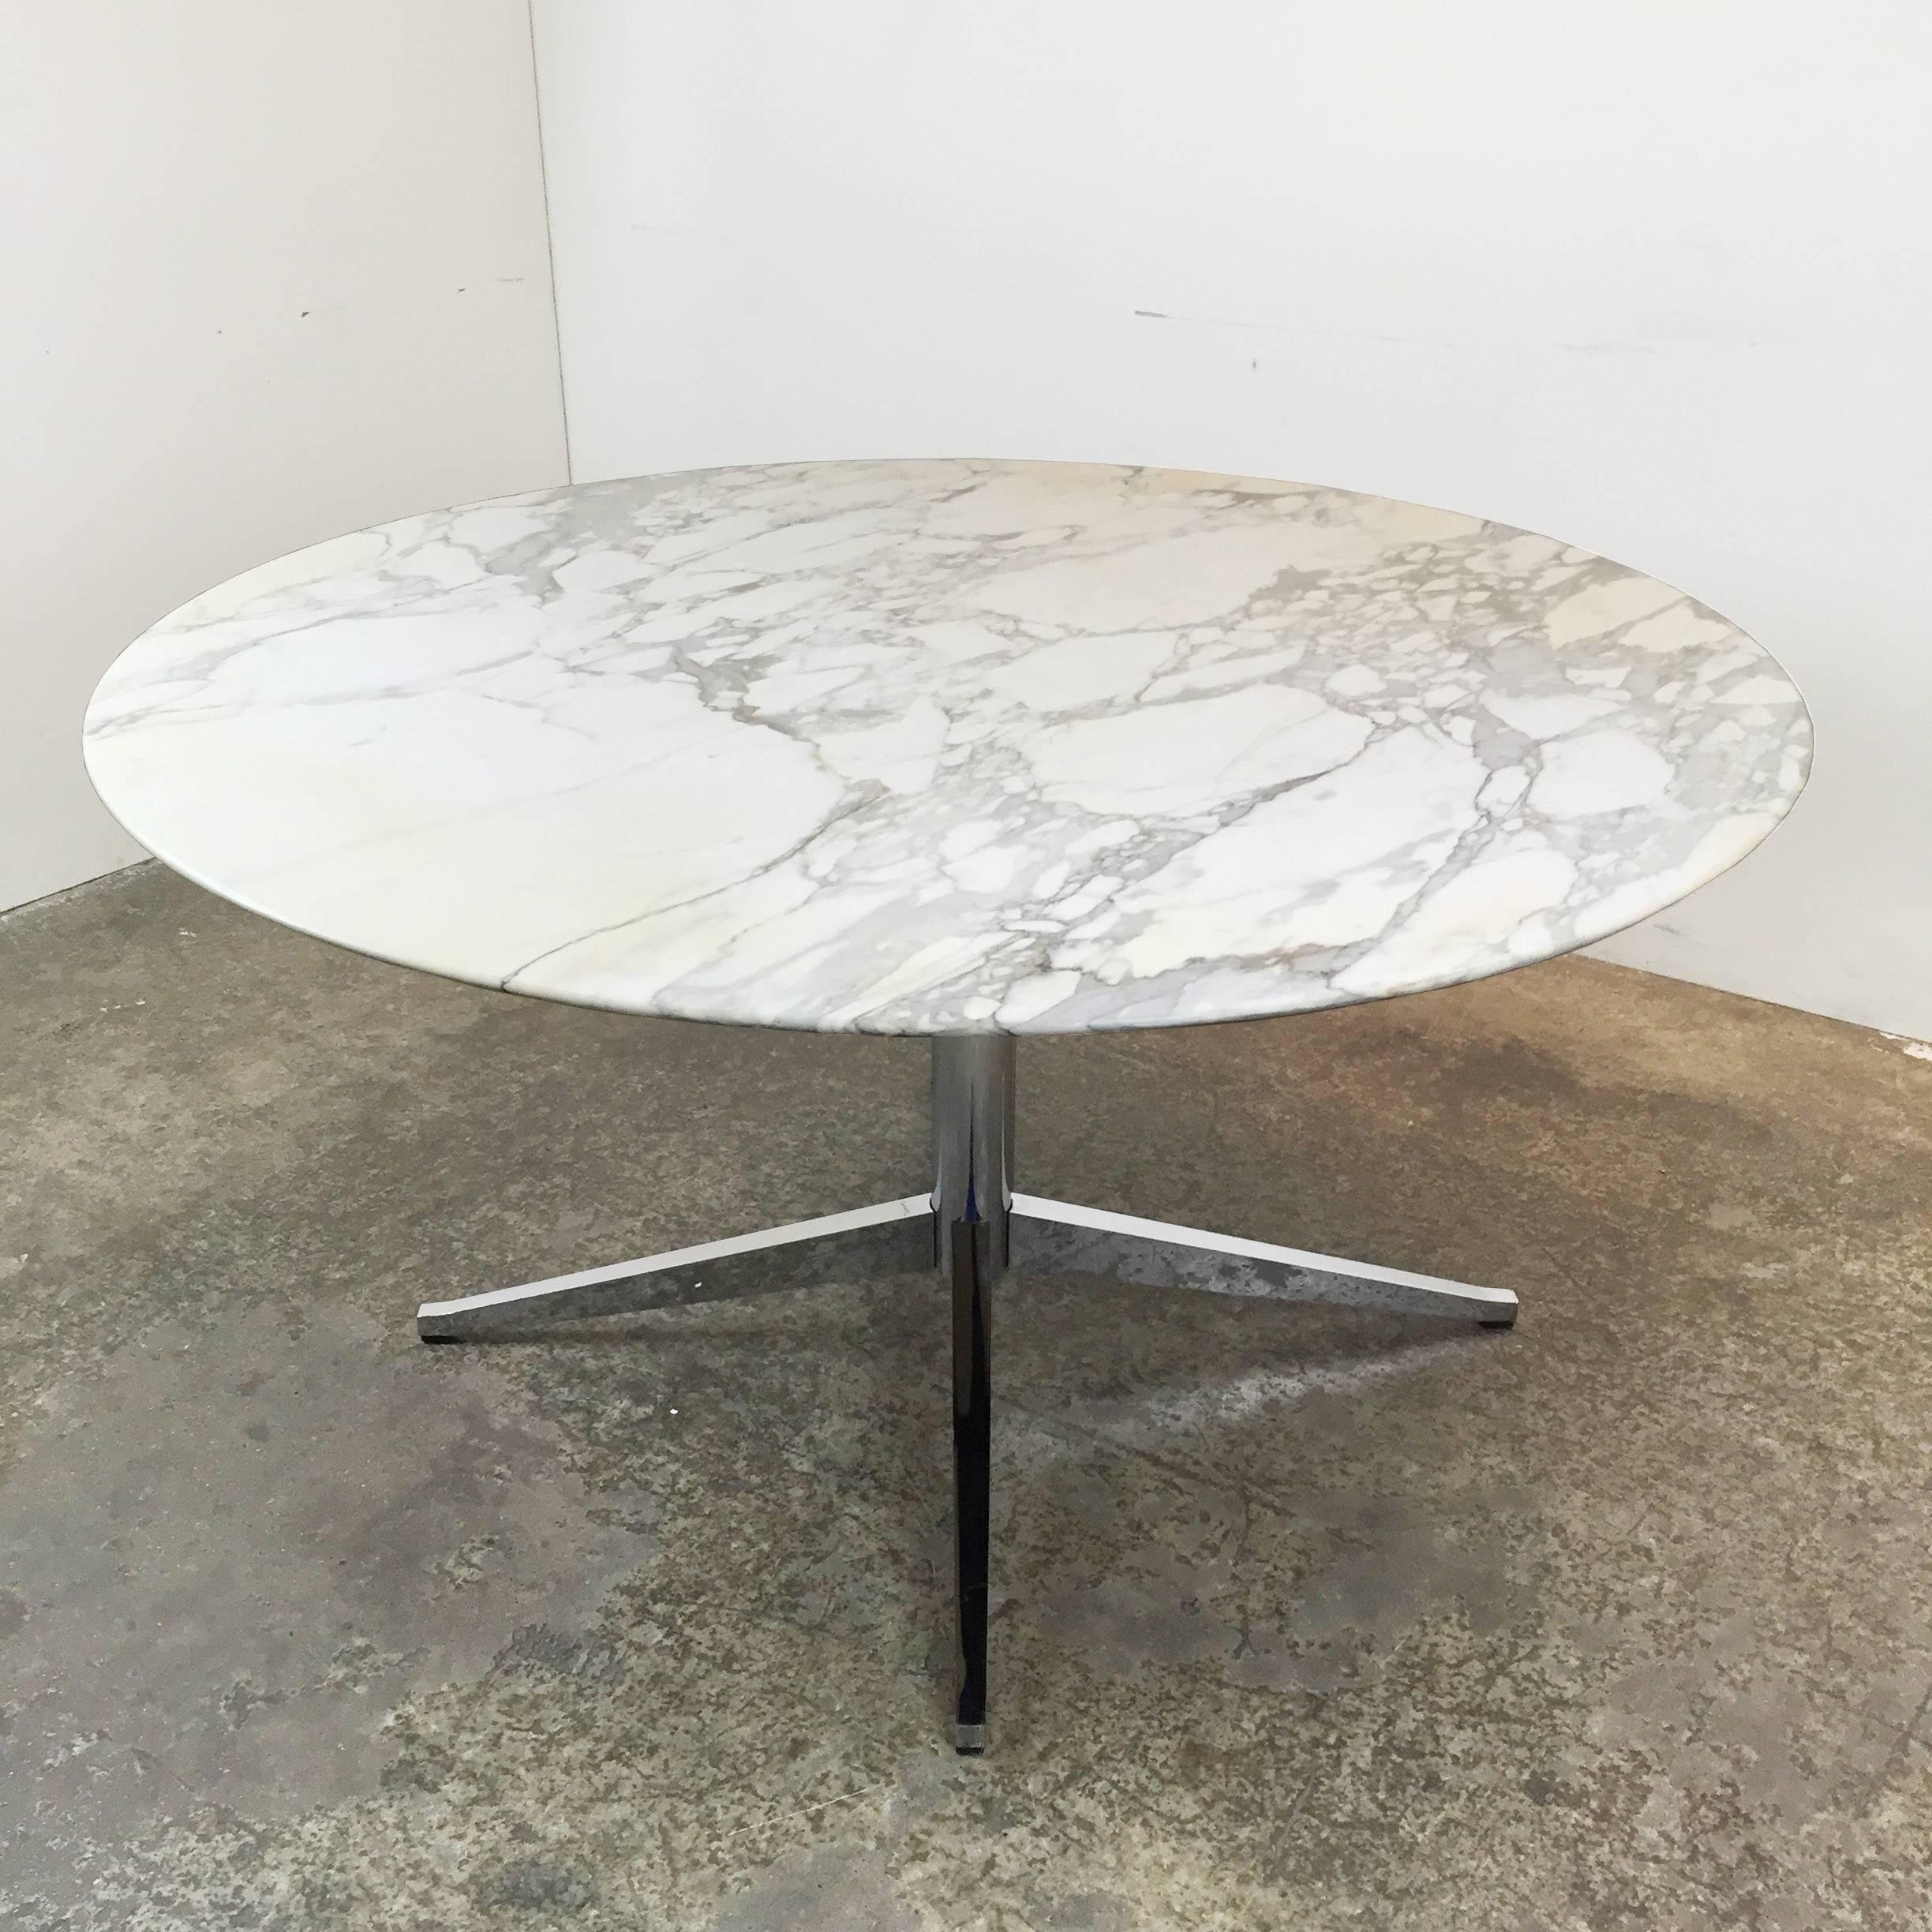 Round Carrara marble table / desk by Florence Knoll. Marble has gray veining with white and beige tone and has chrome star base, circa 1950s.

Dimensions: 54